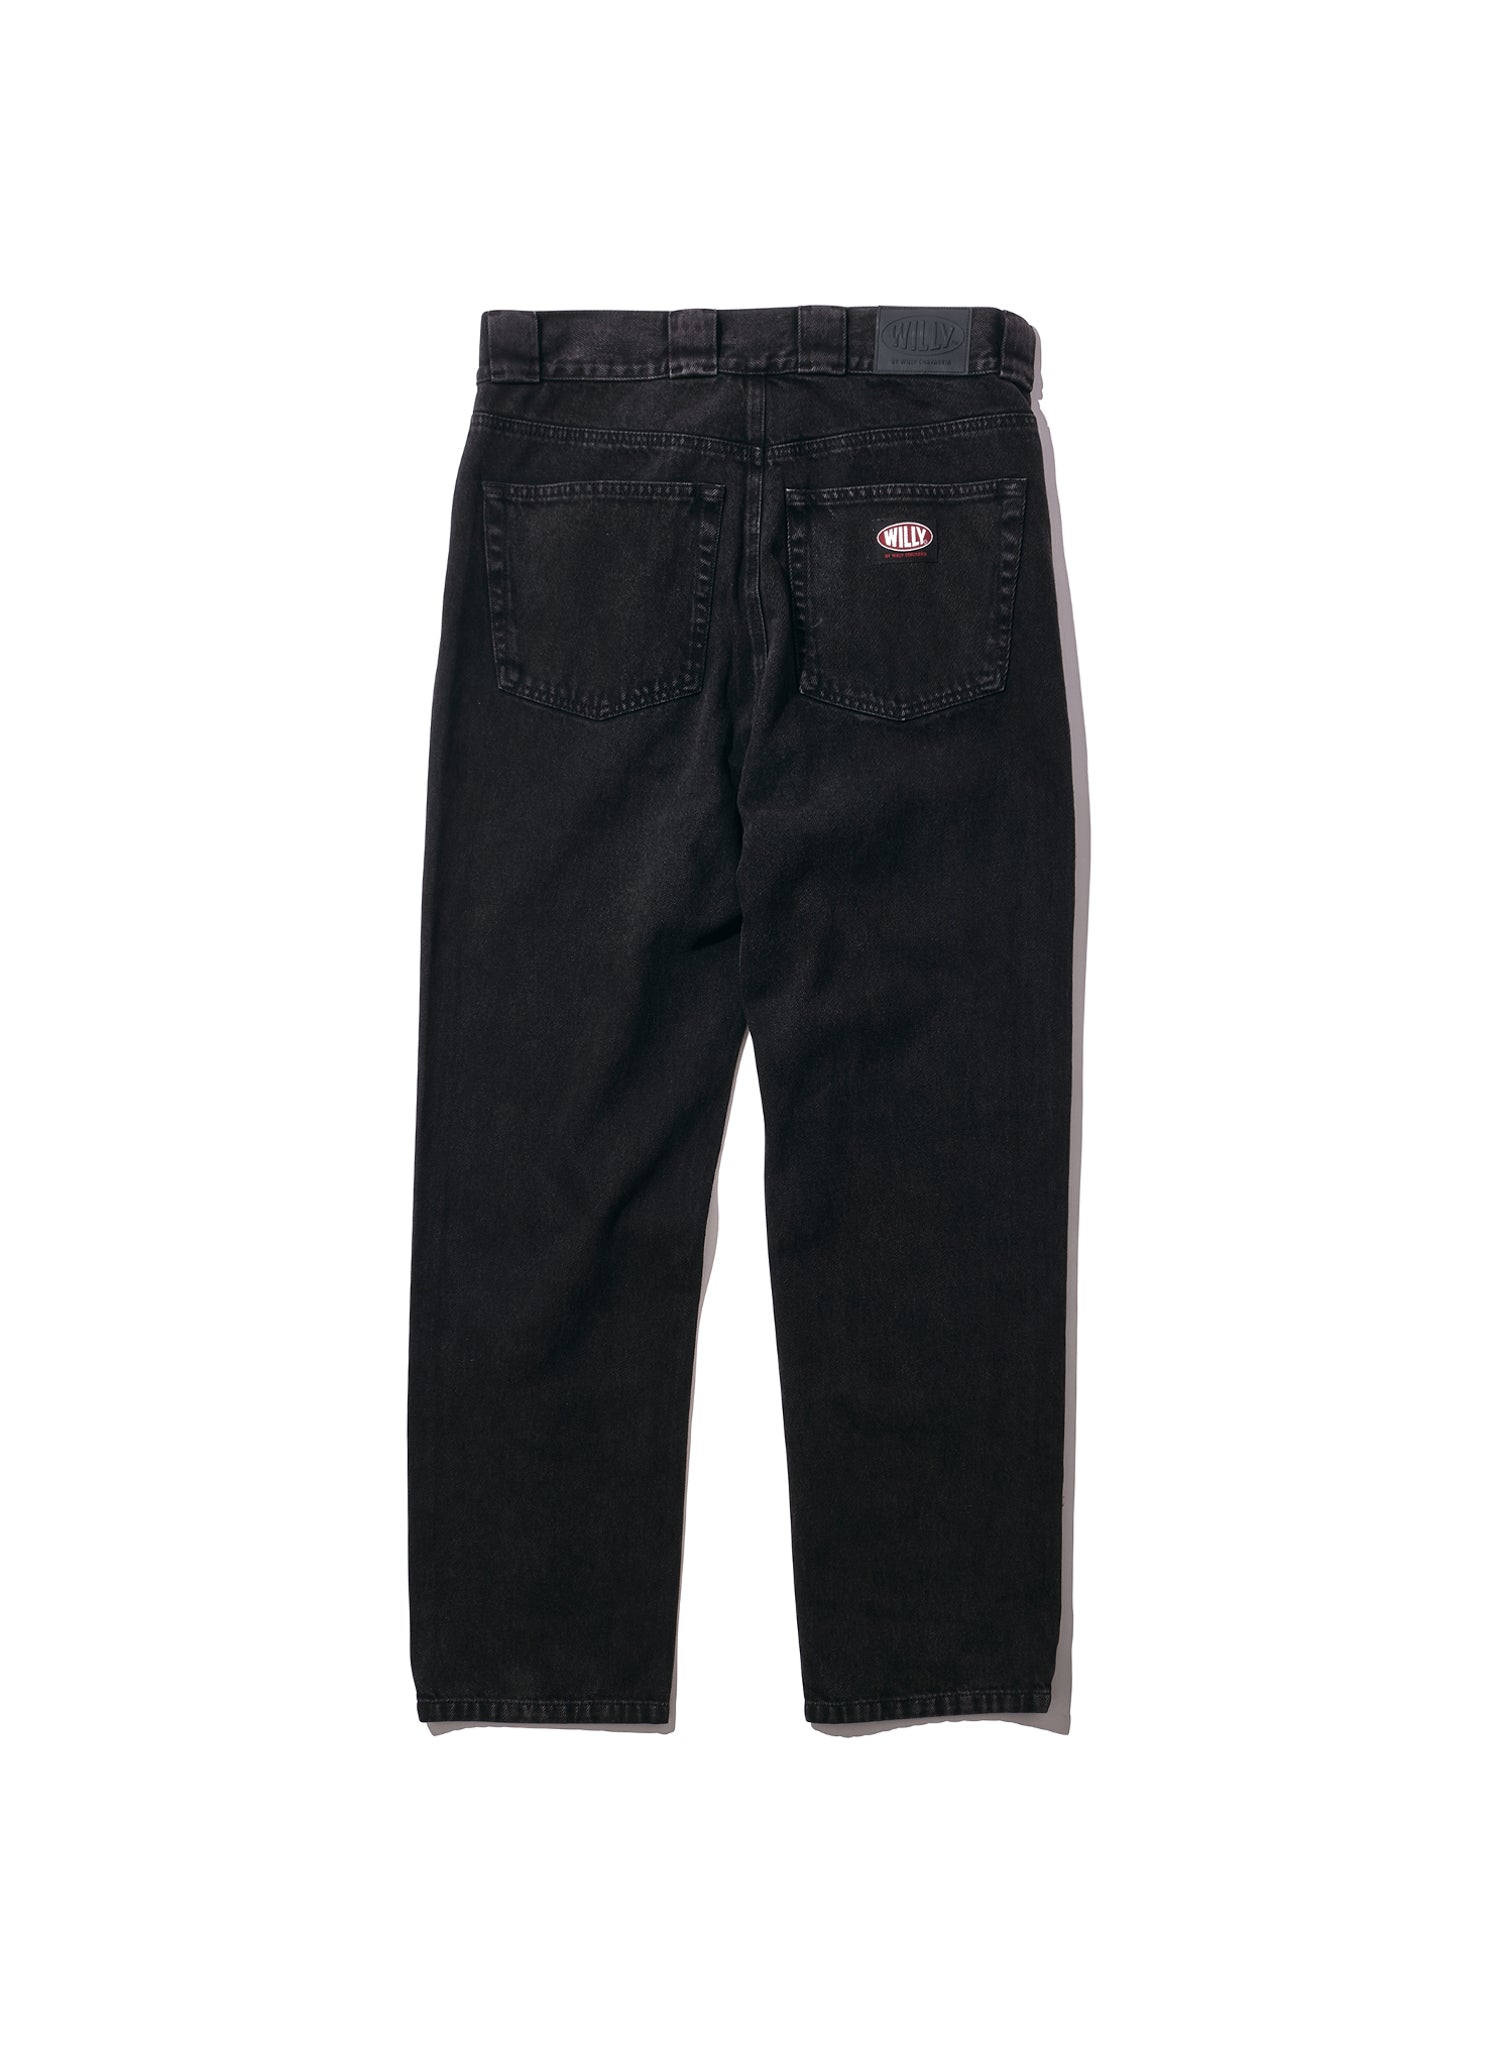 <span style="color: #f50b0b;">Last One</span> 
WILLY CHAVARRIA / LOVE GARAGE JEAN WASHED BLACK